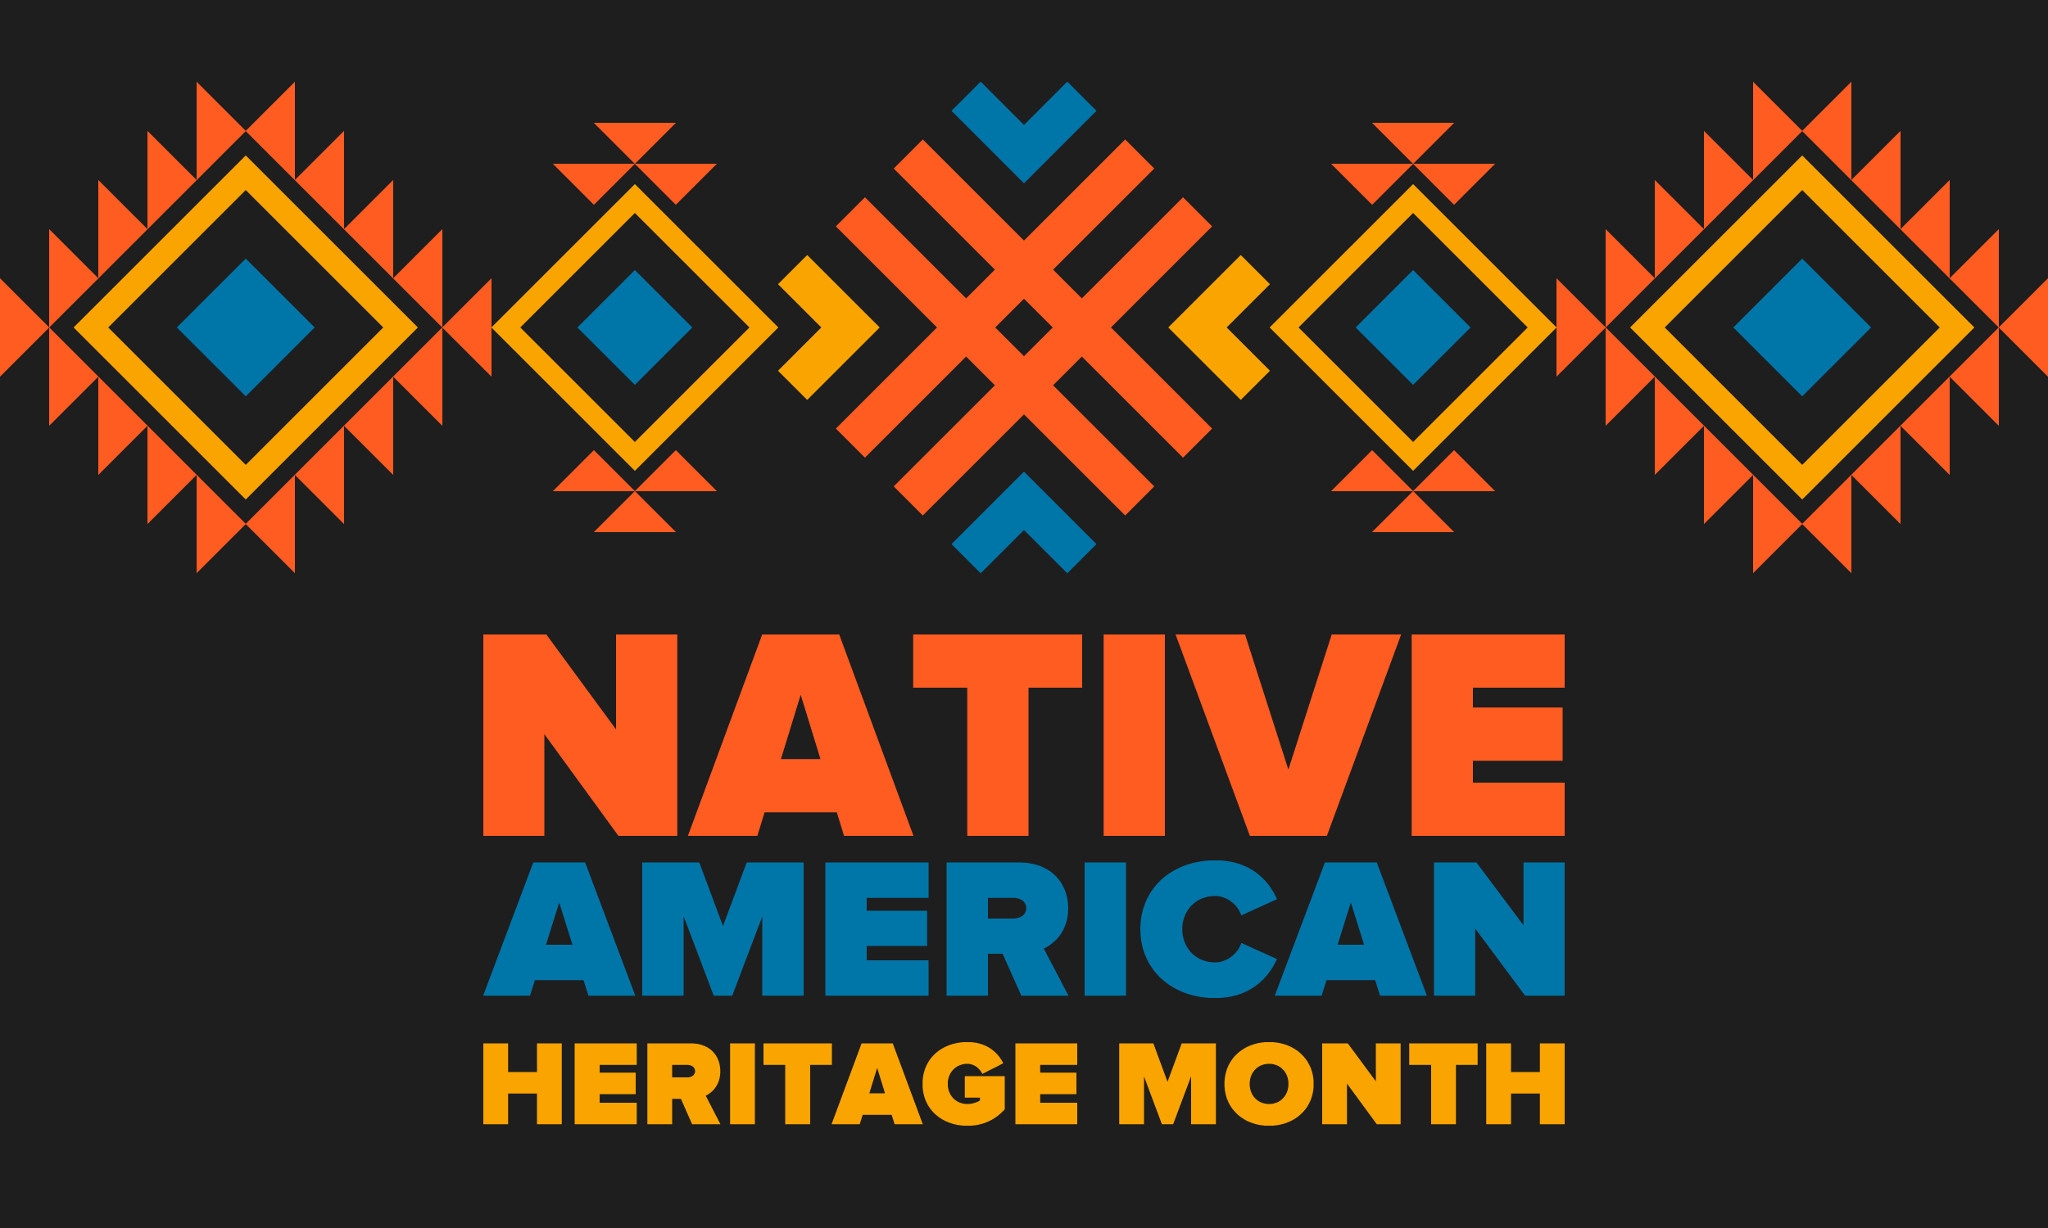 Simple image with "Native American Heritage Month"